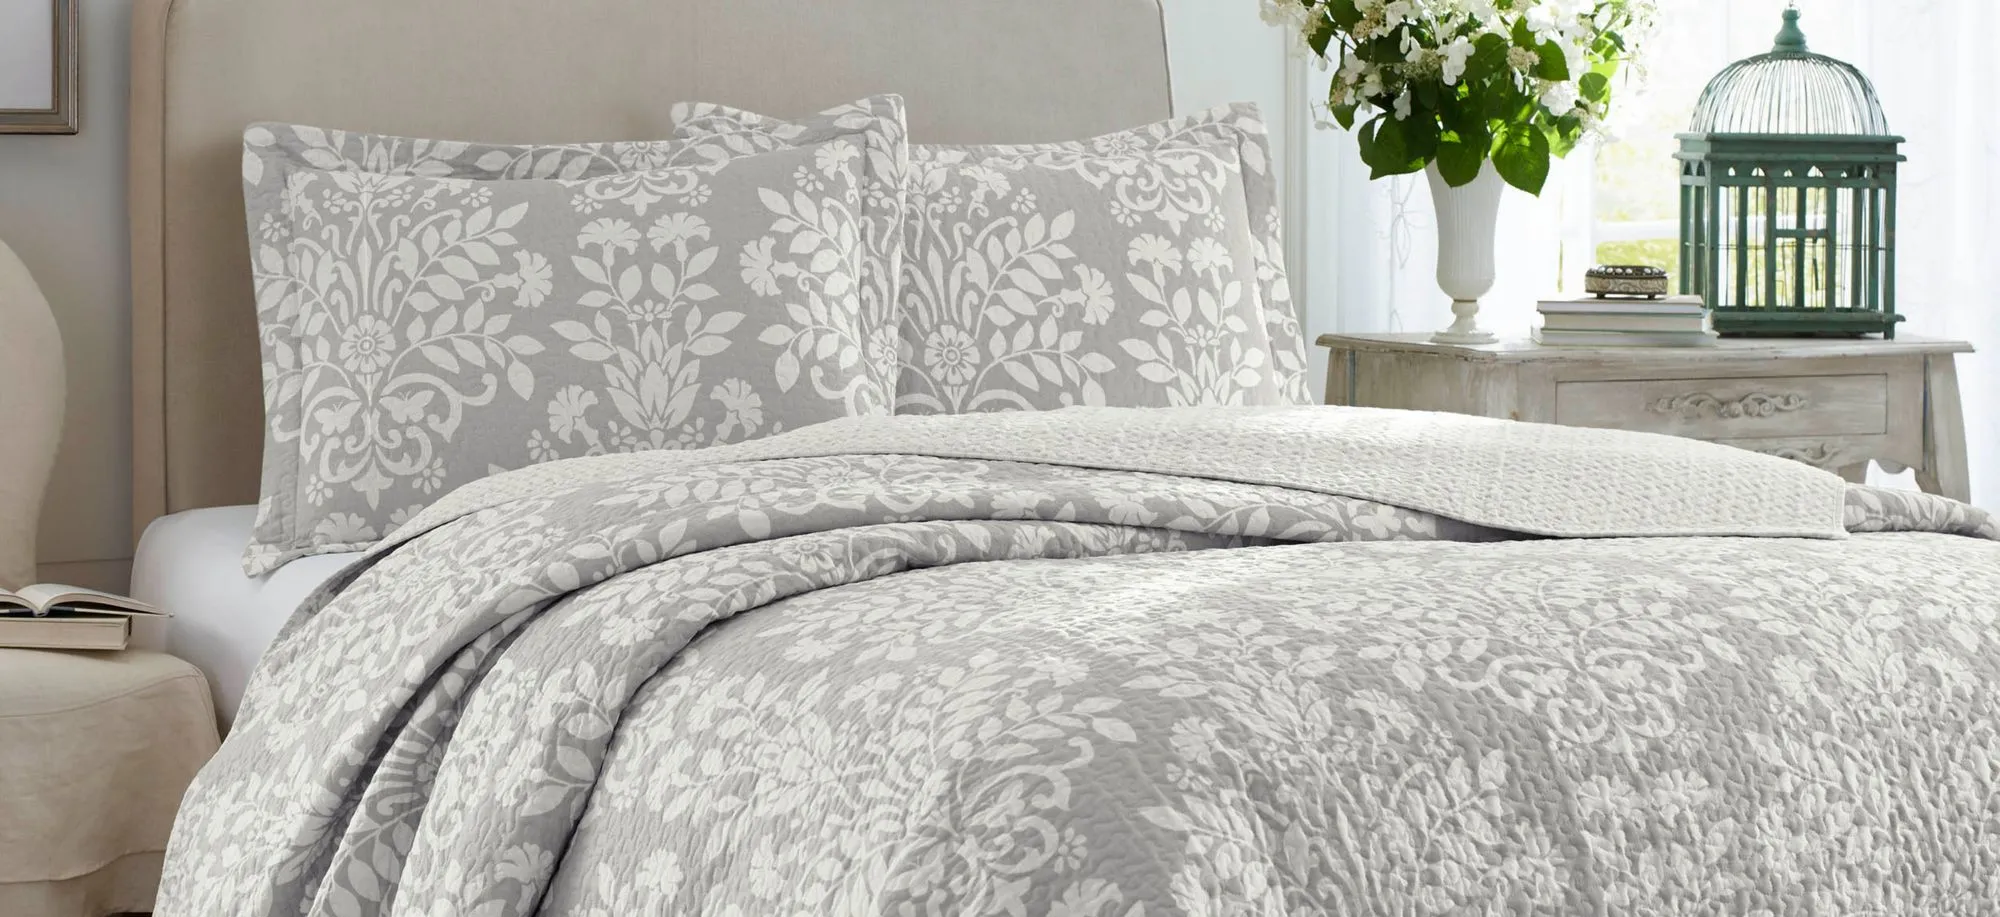 Rowland-2 Piece Quilt Set in DOVE GRAY by Revman International